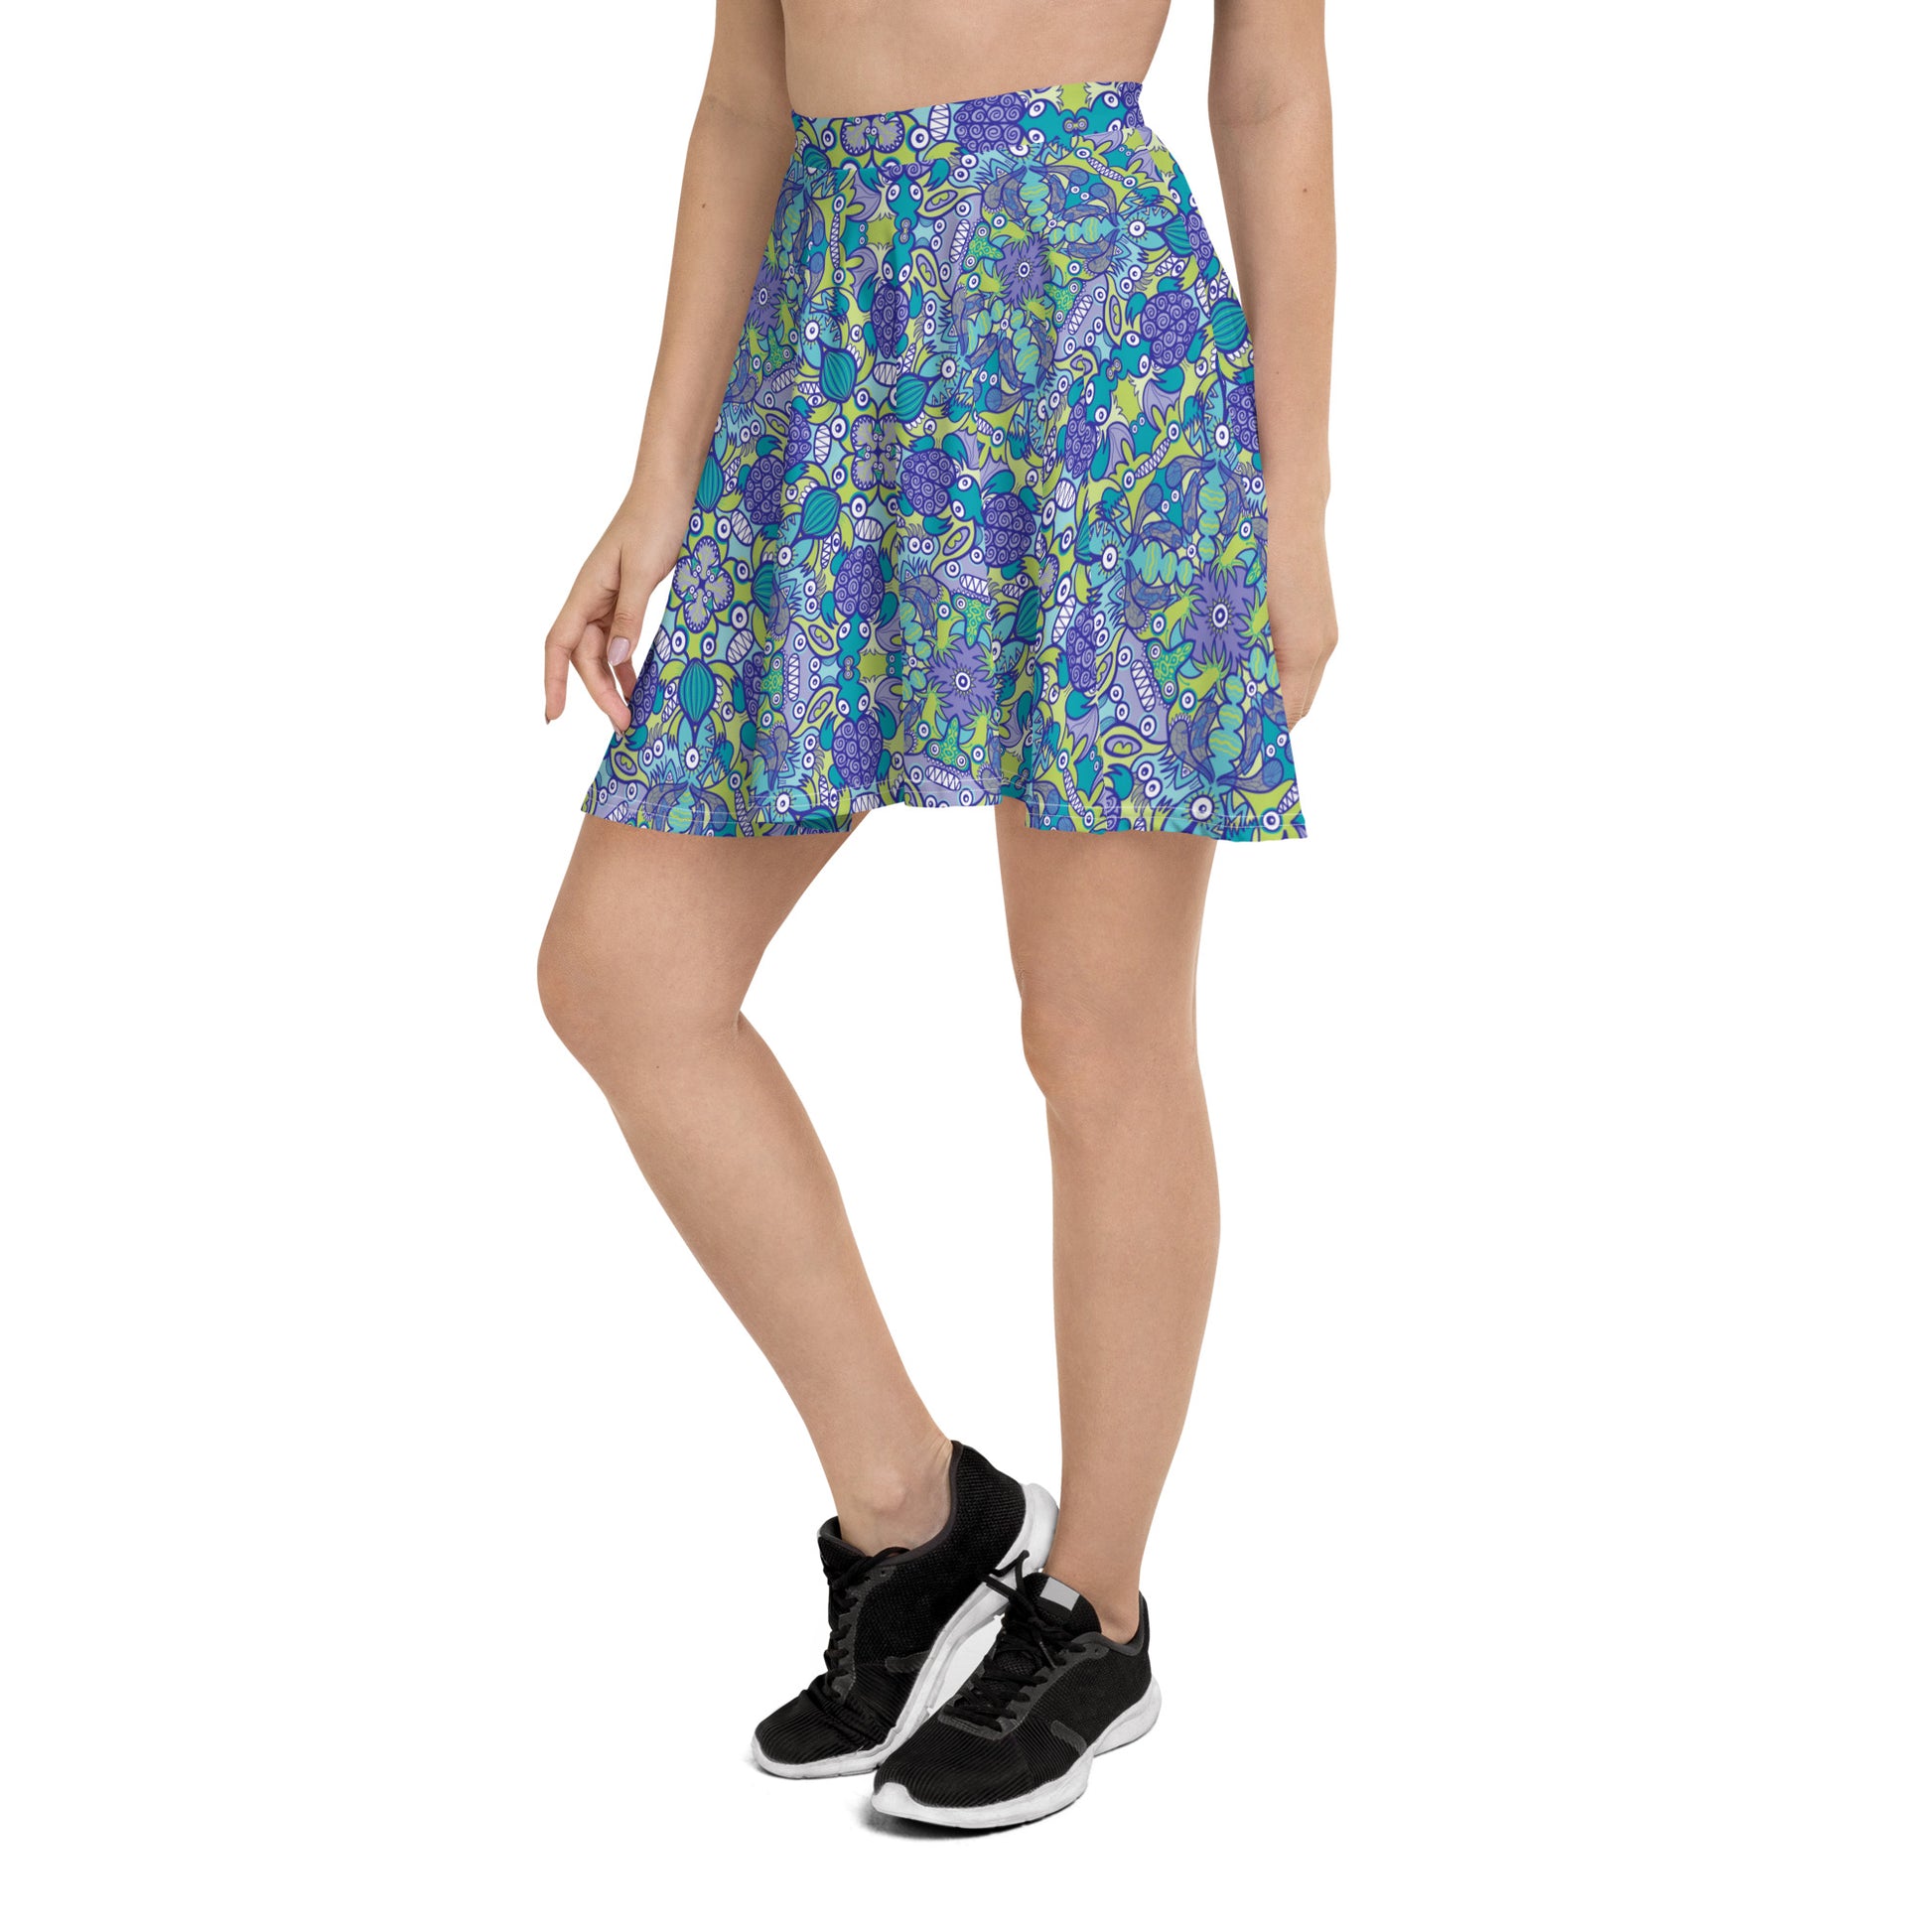 Once upon a time in an ocean full of life - Skater Skirt. Side view